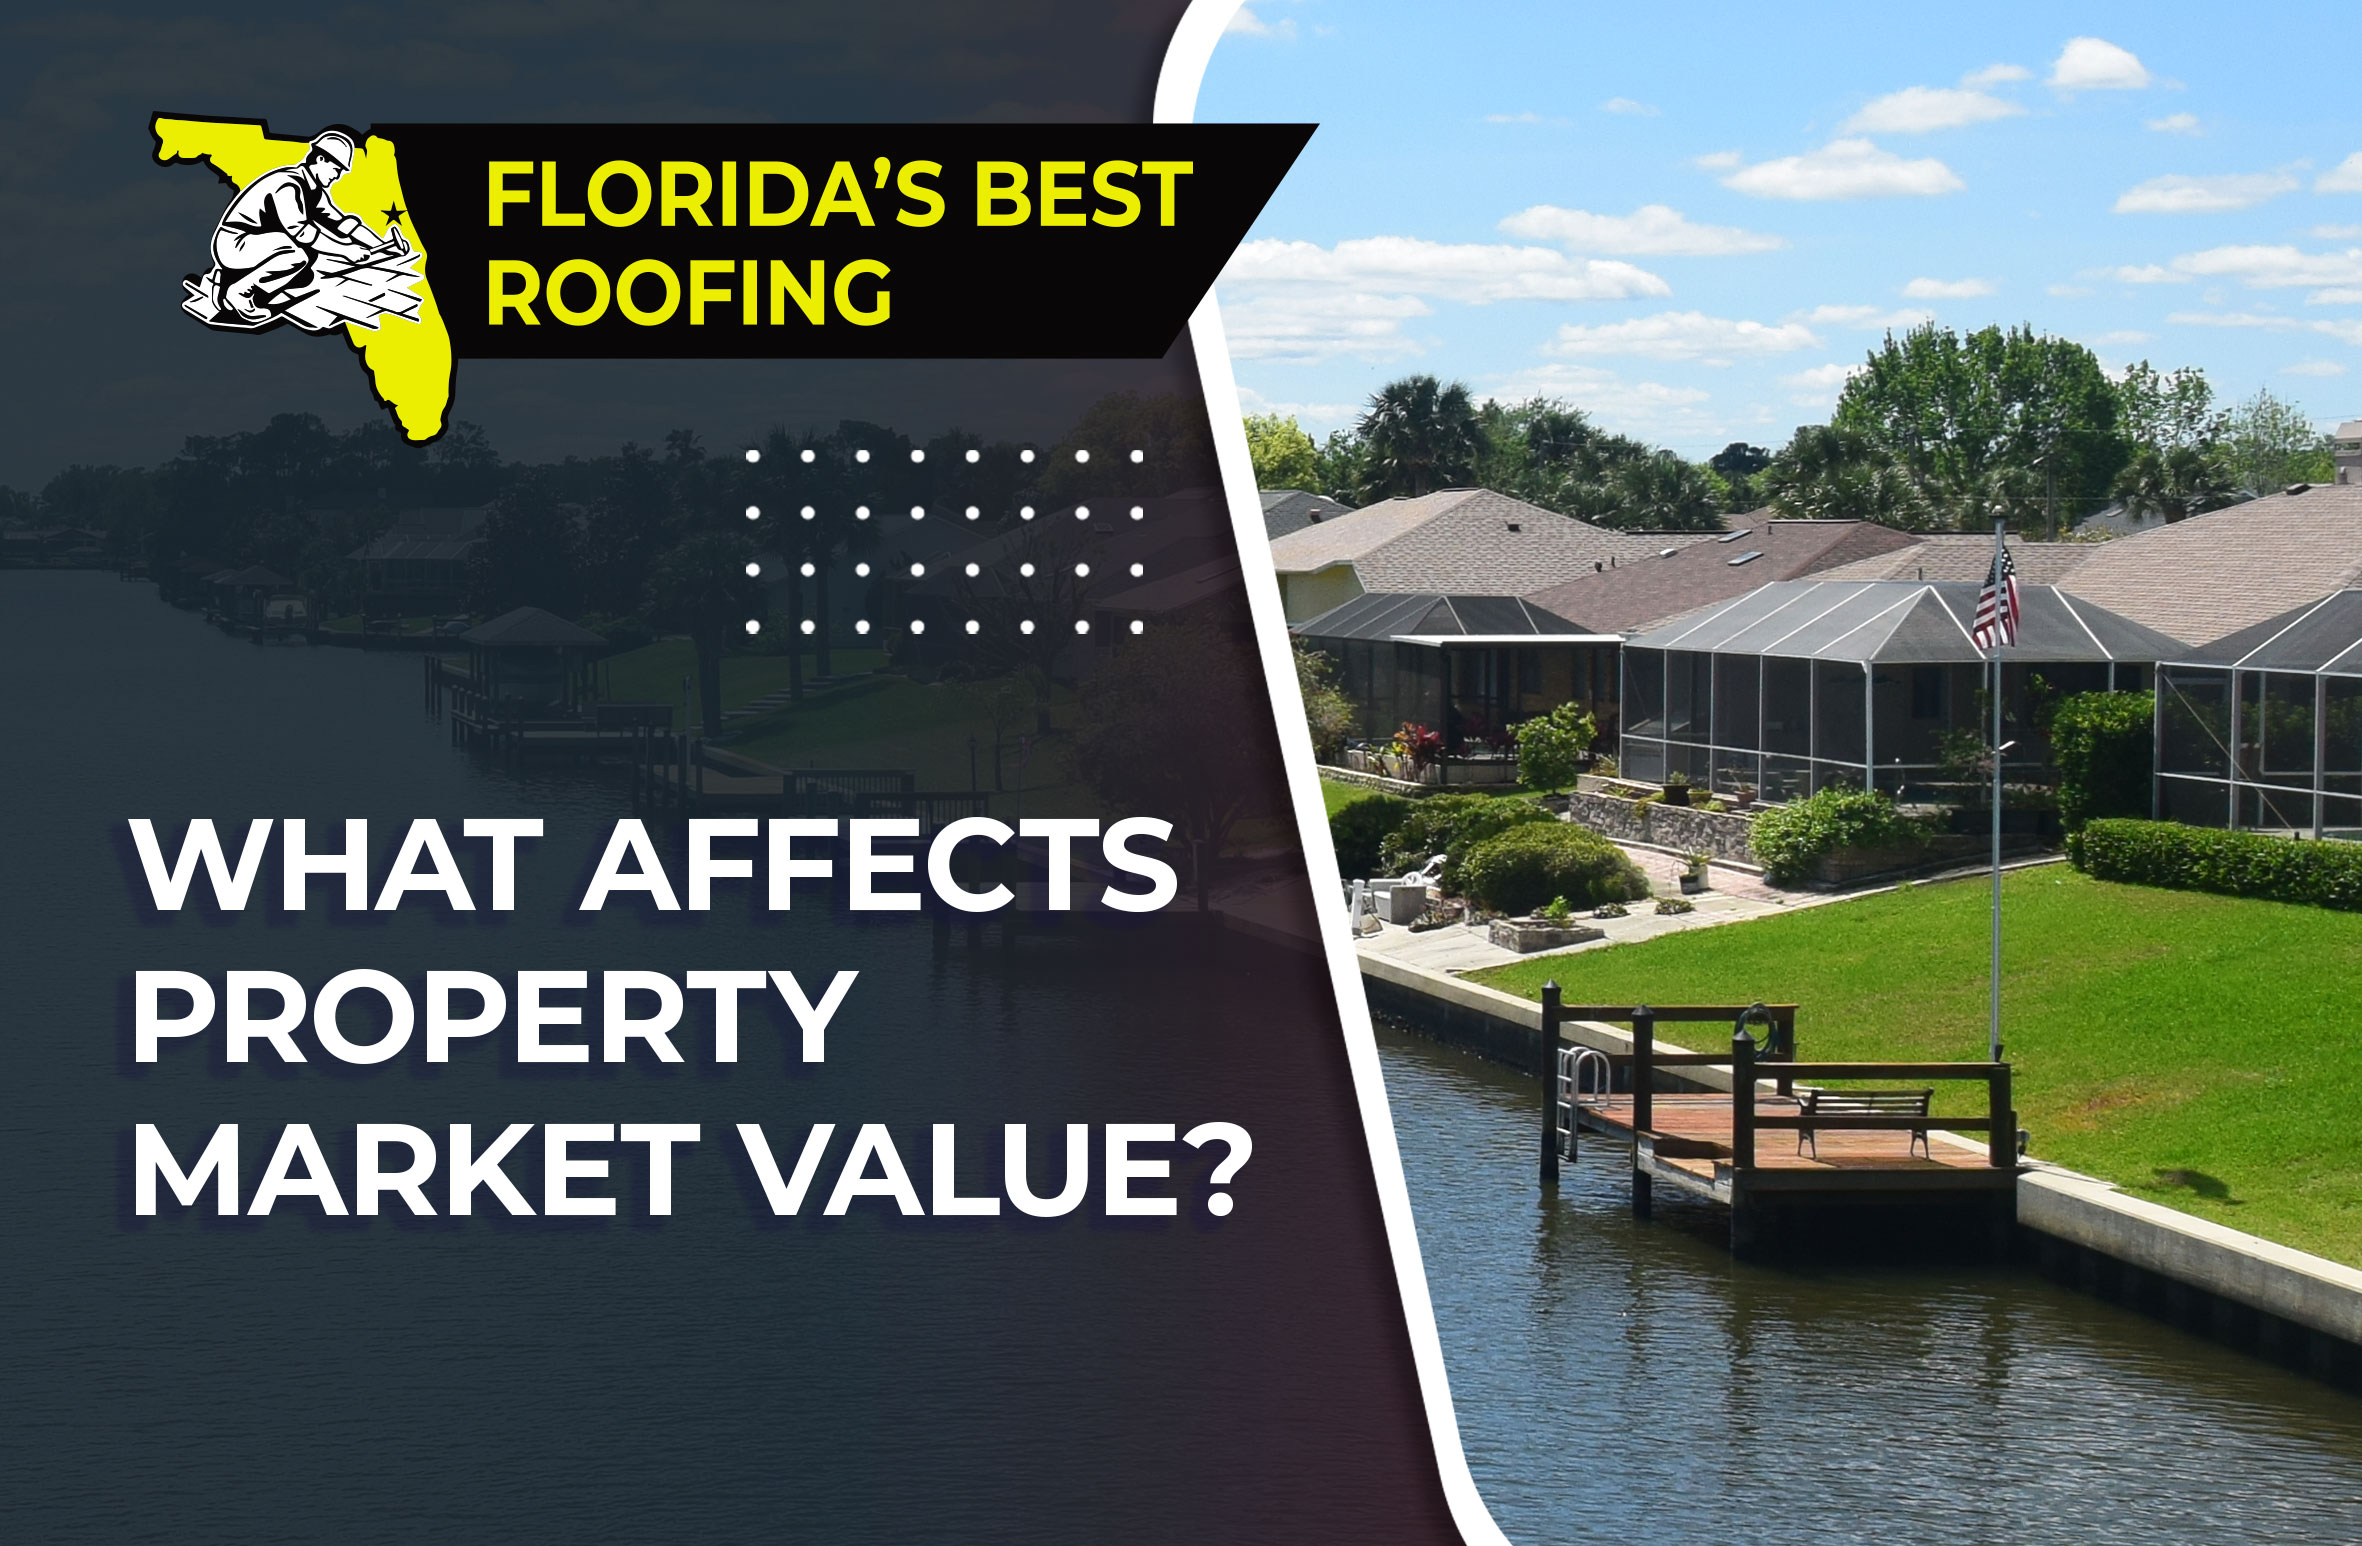 What Affects Property Market Value?